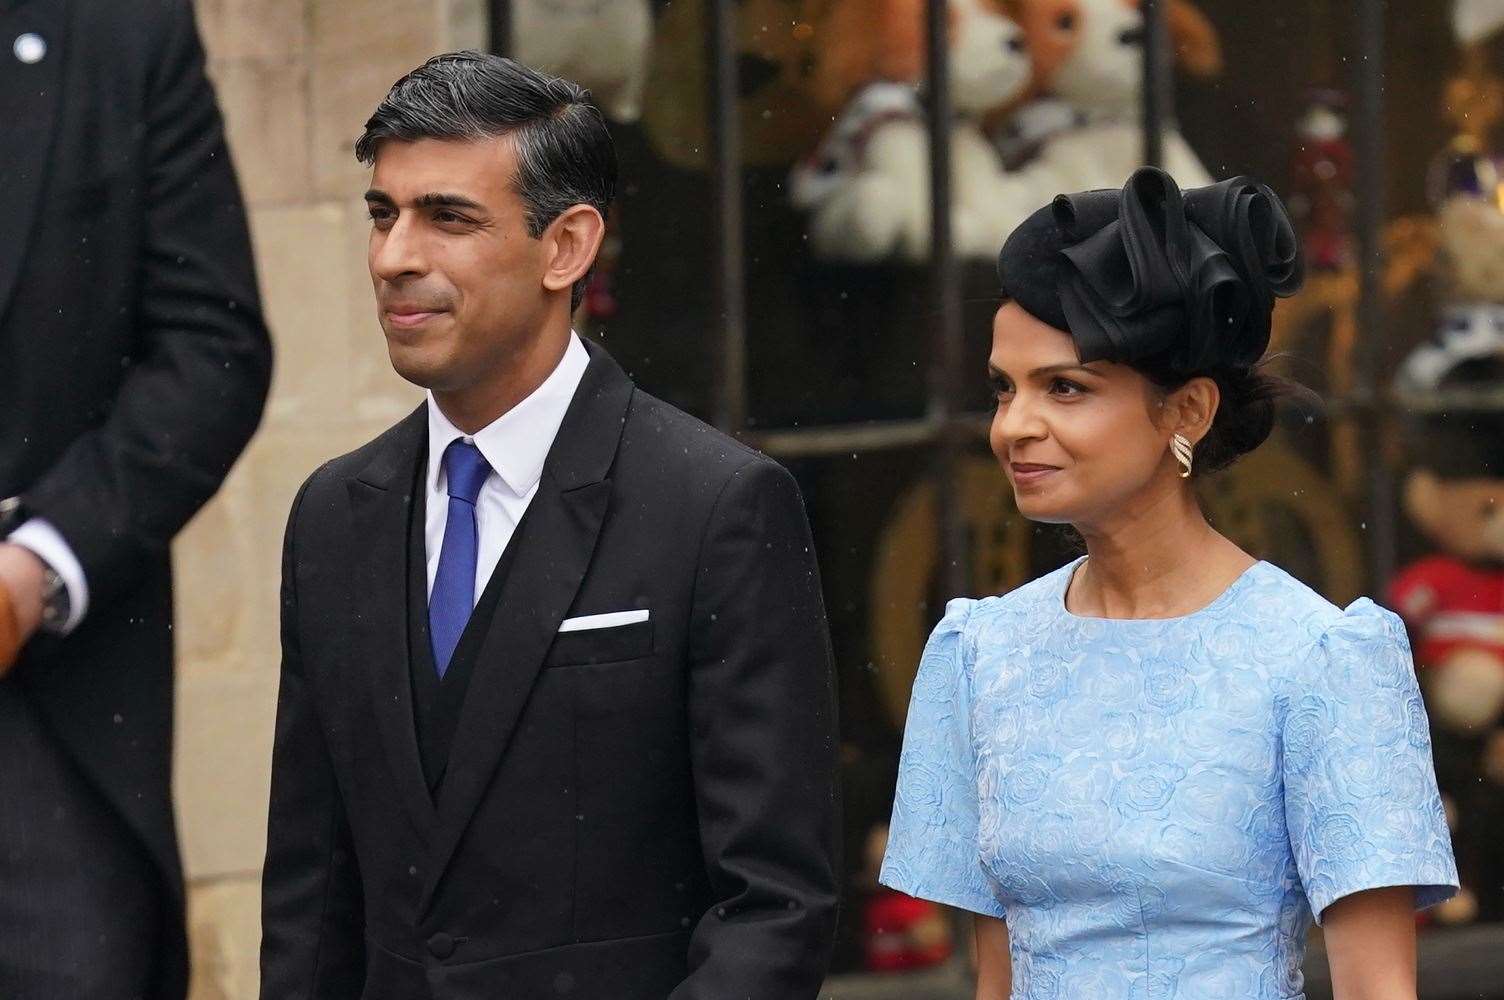 Prime Minister Rishi Sunak and his wife Akshata Murty arriving at the abbey (Jacob King/PA)